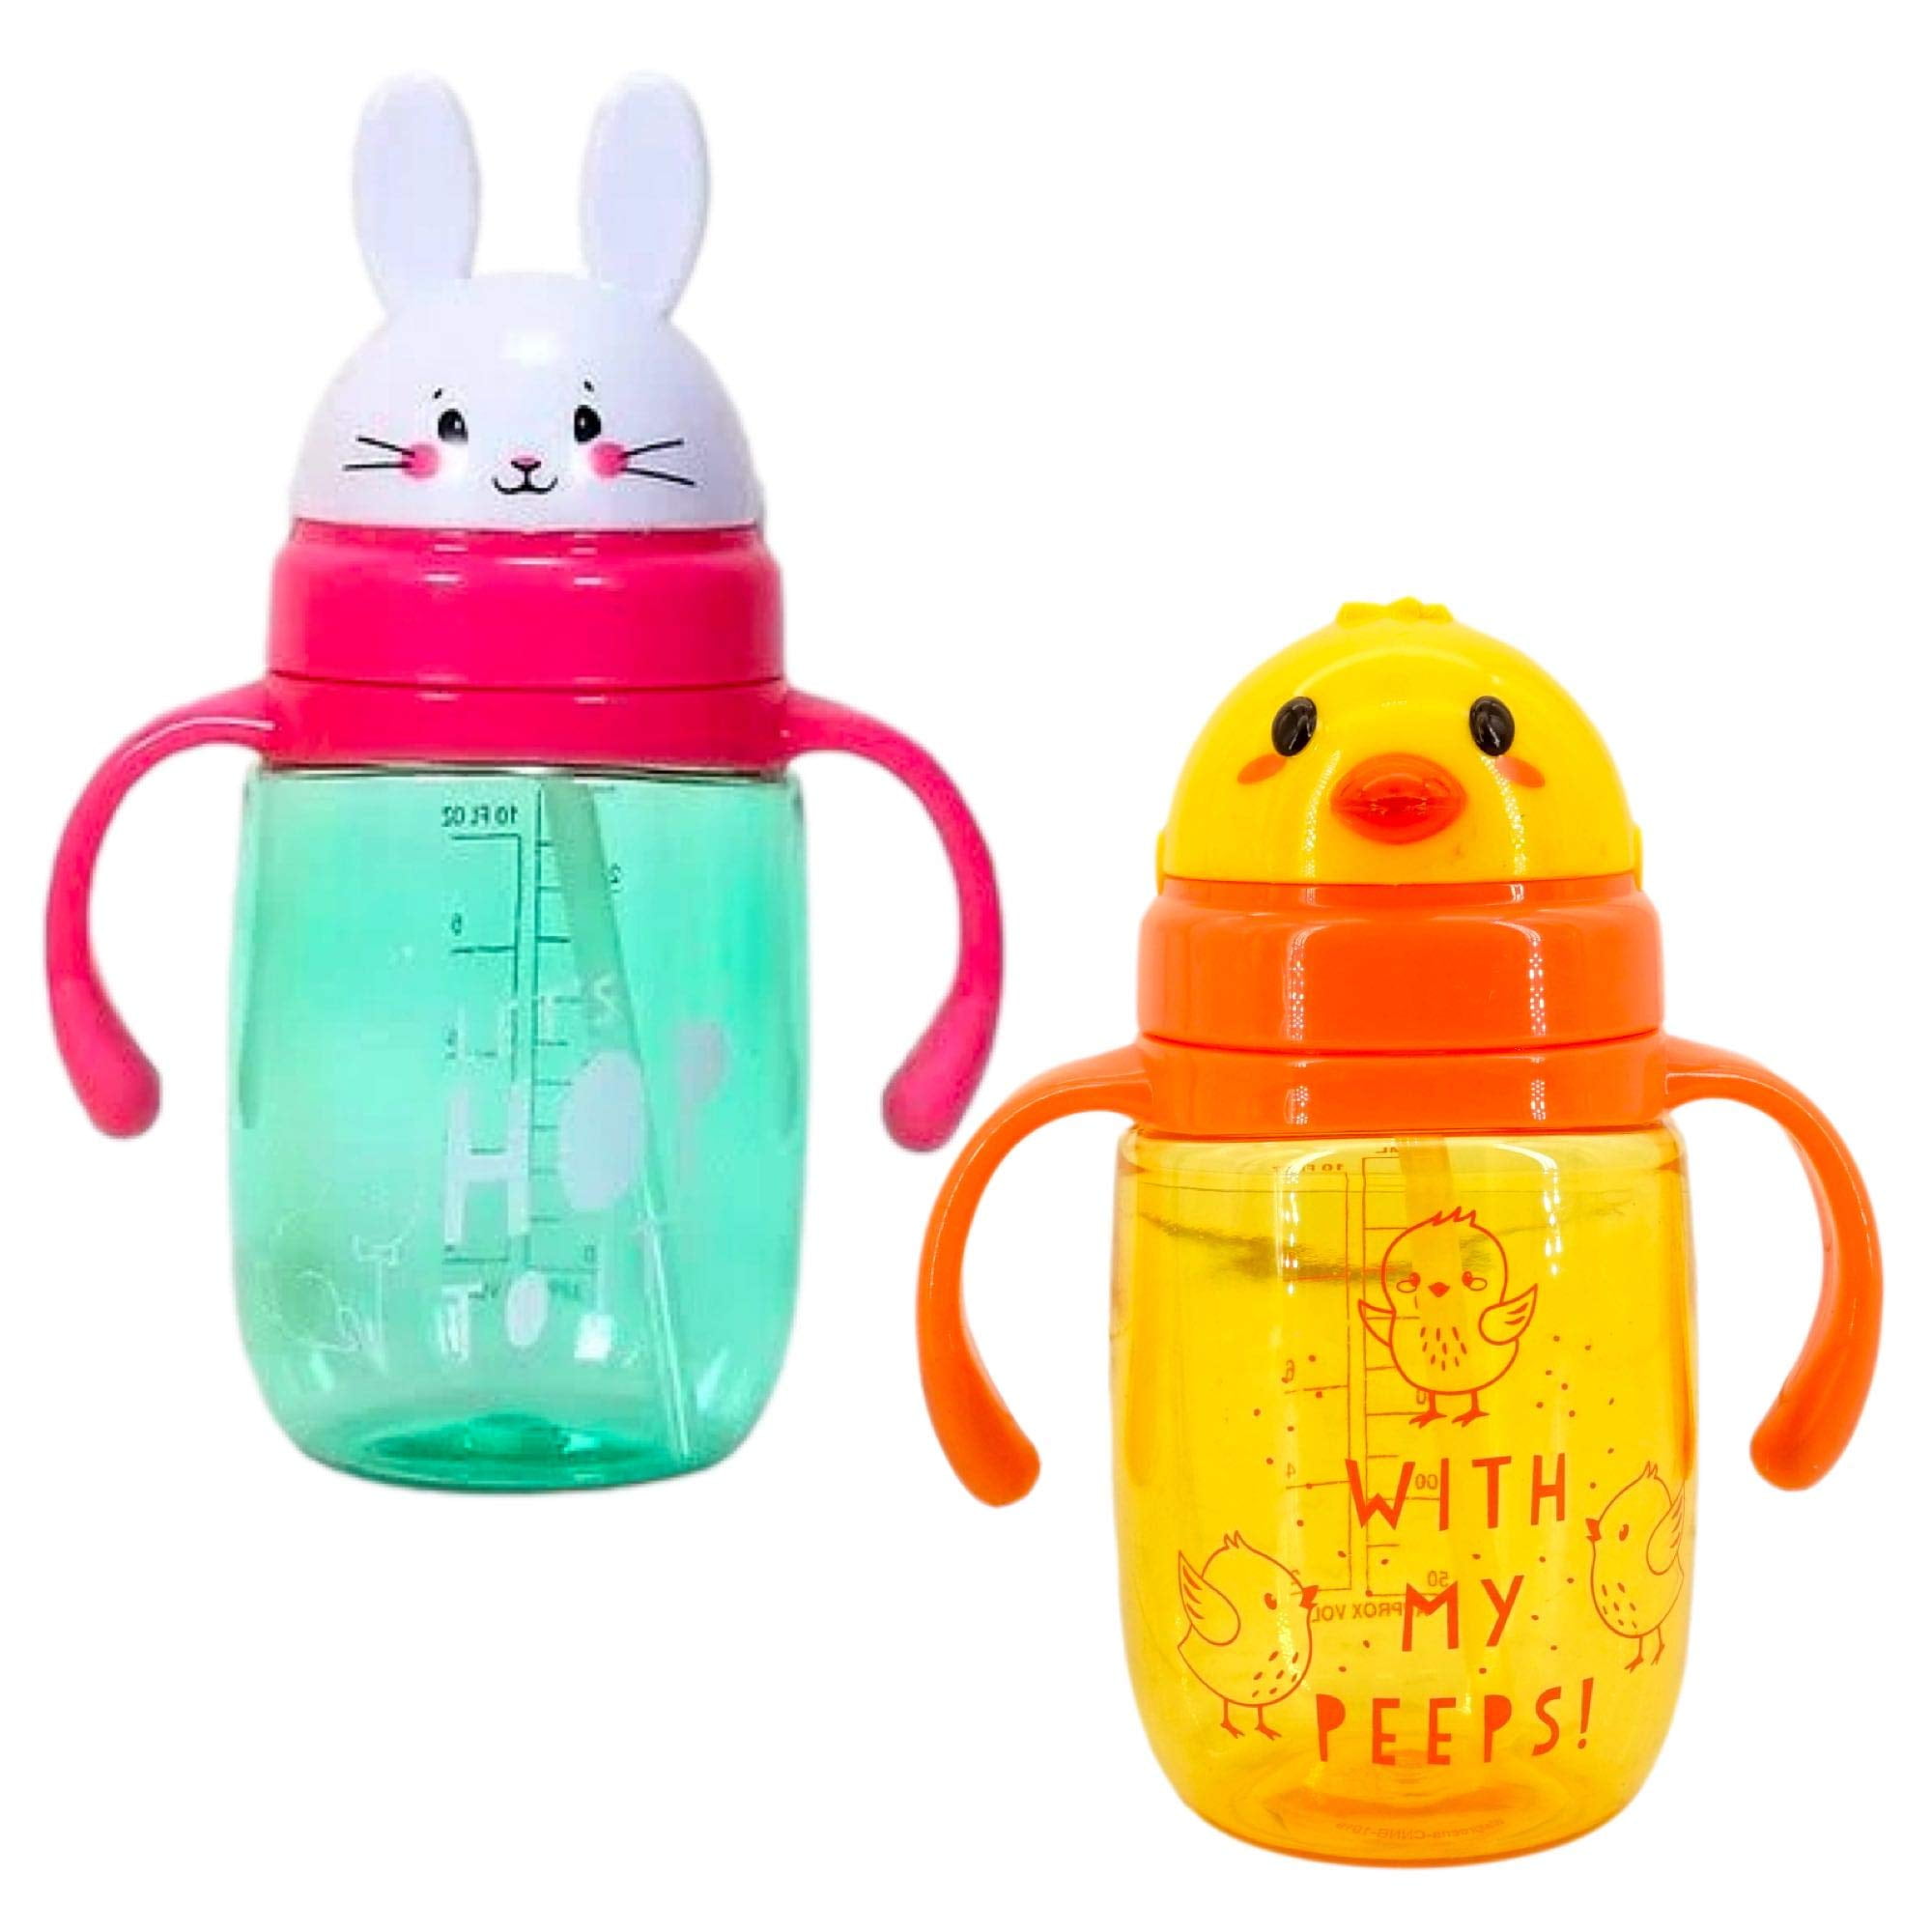 Cute Bugs, Kids Flip Top, Sippy Cup, Spill Proof, Insulated, Personalized,  Kids Tumbler, Cup for Lunch Box, Training Cup, Toddler Cup Easter 